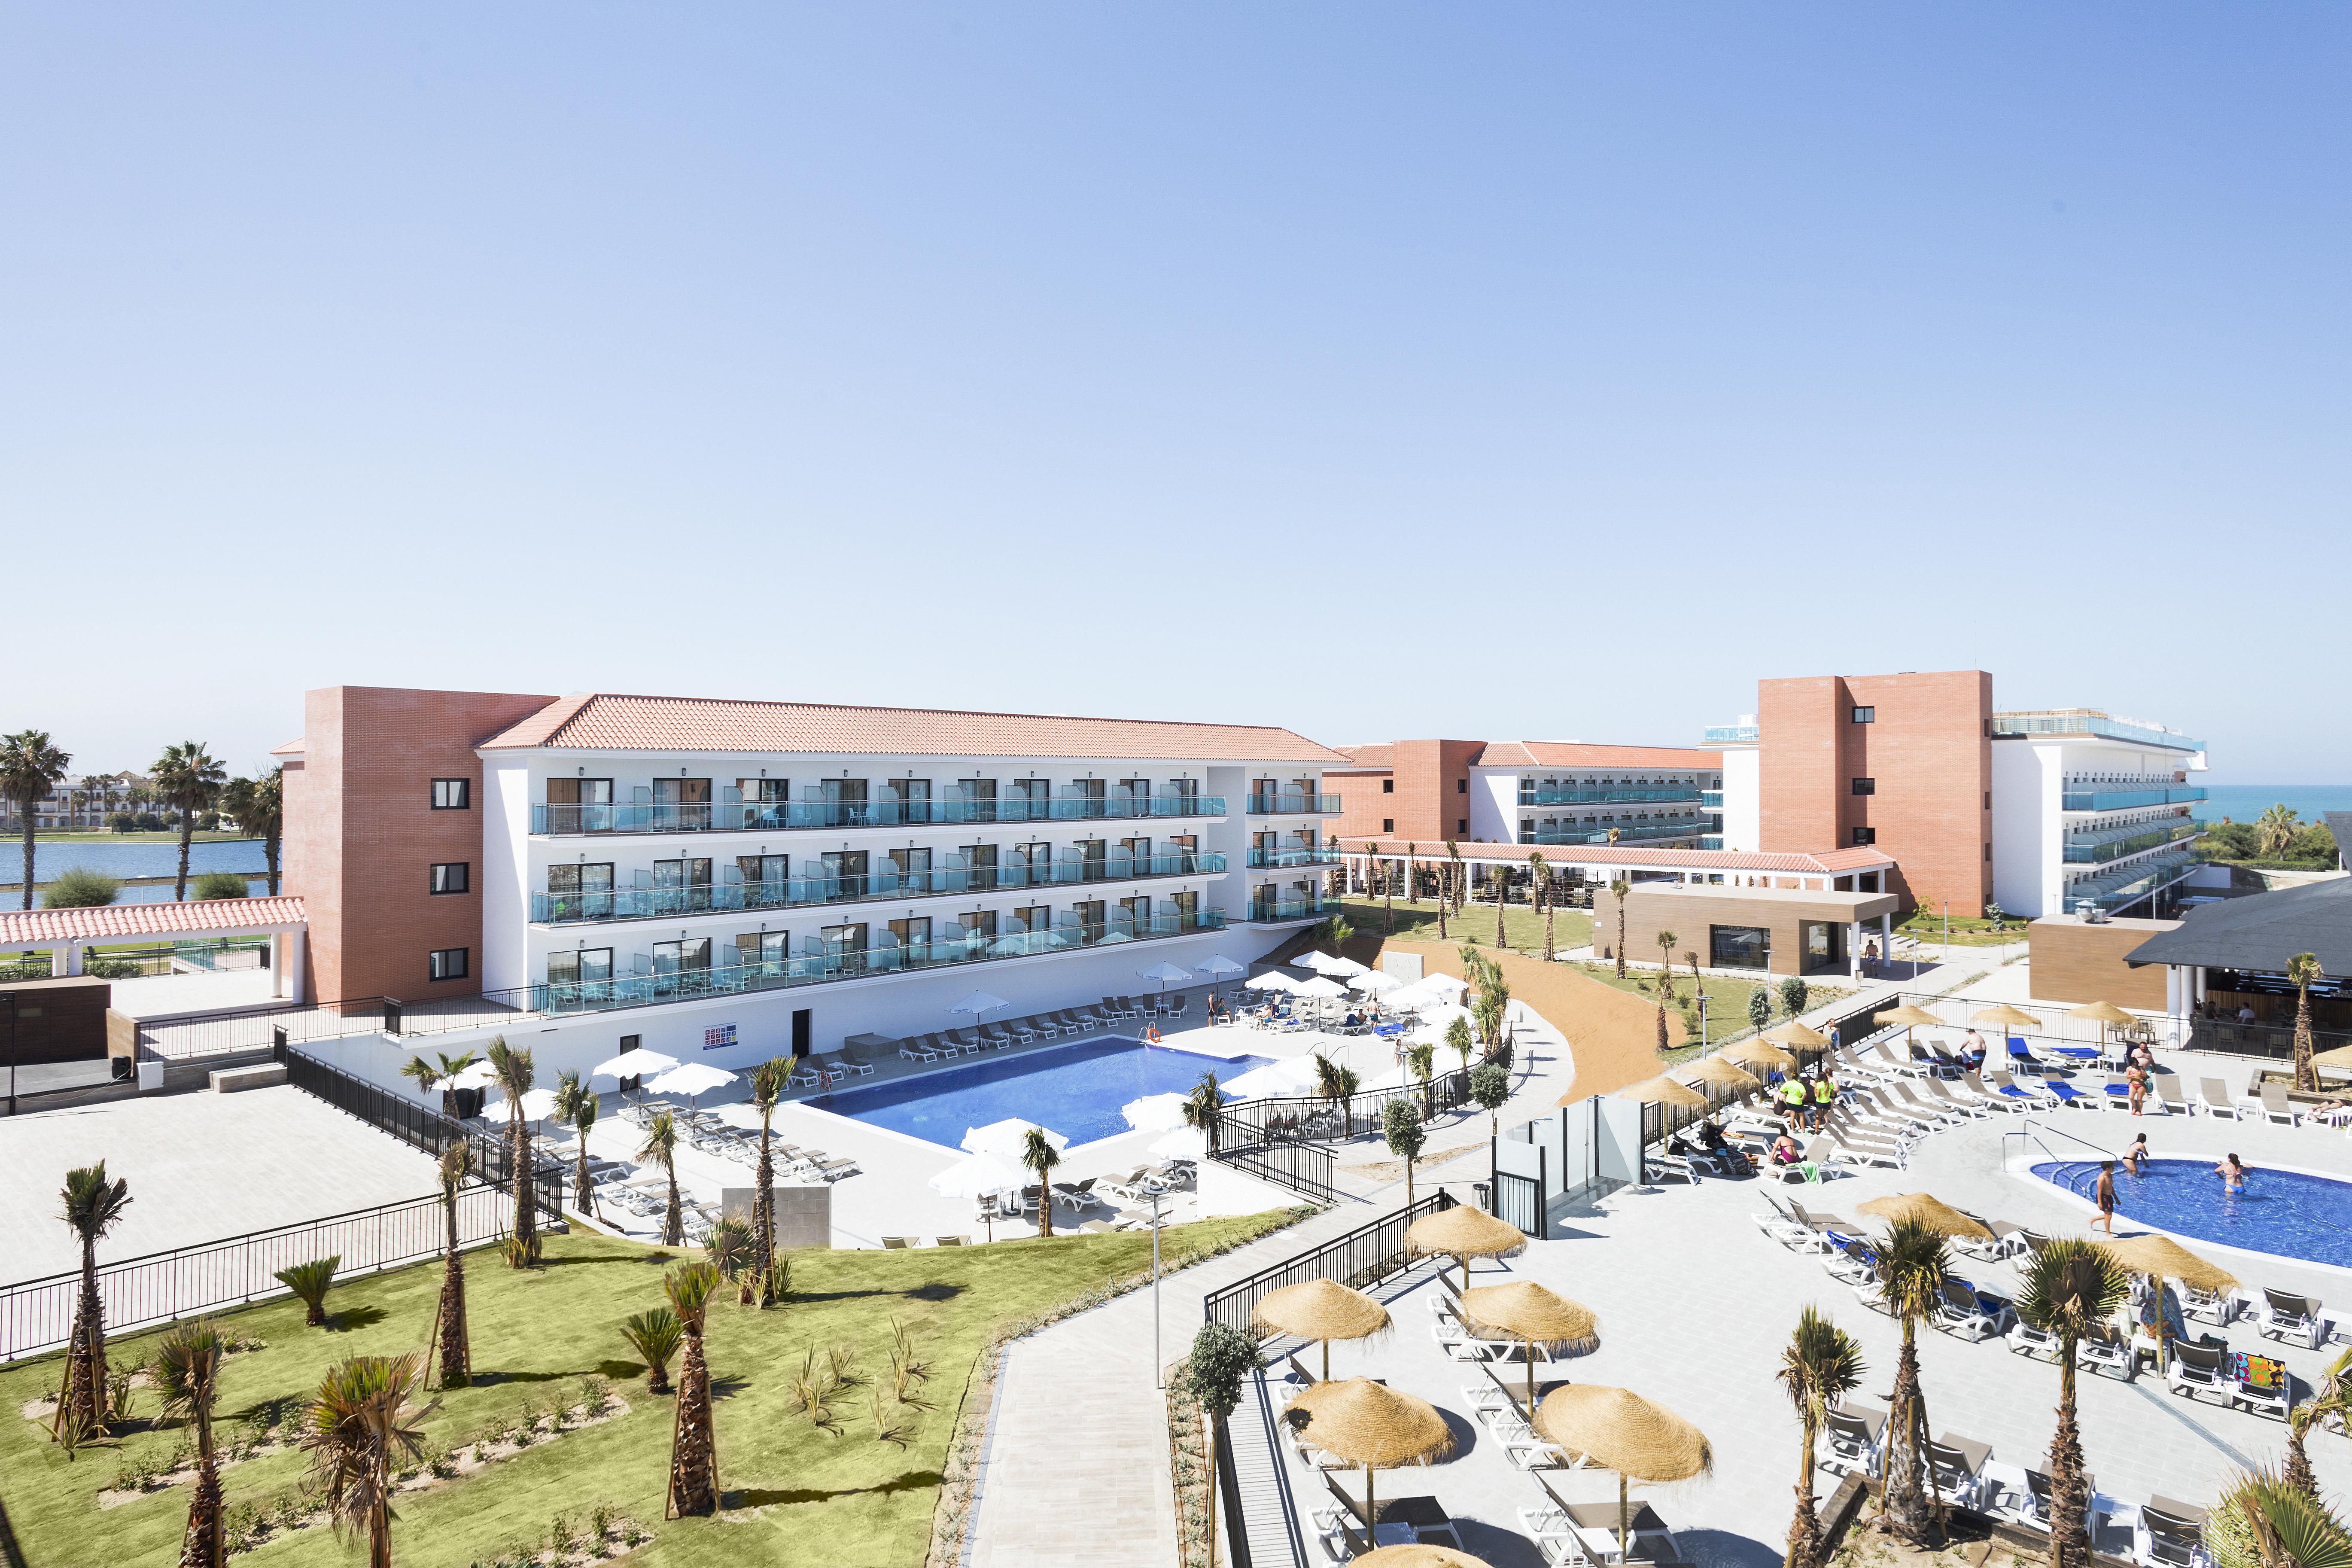 HOTEL BEST COSTA BALLENA CHIPIONA 4* (Spain) - from US$ 92 | BOOKED